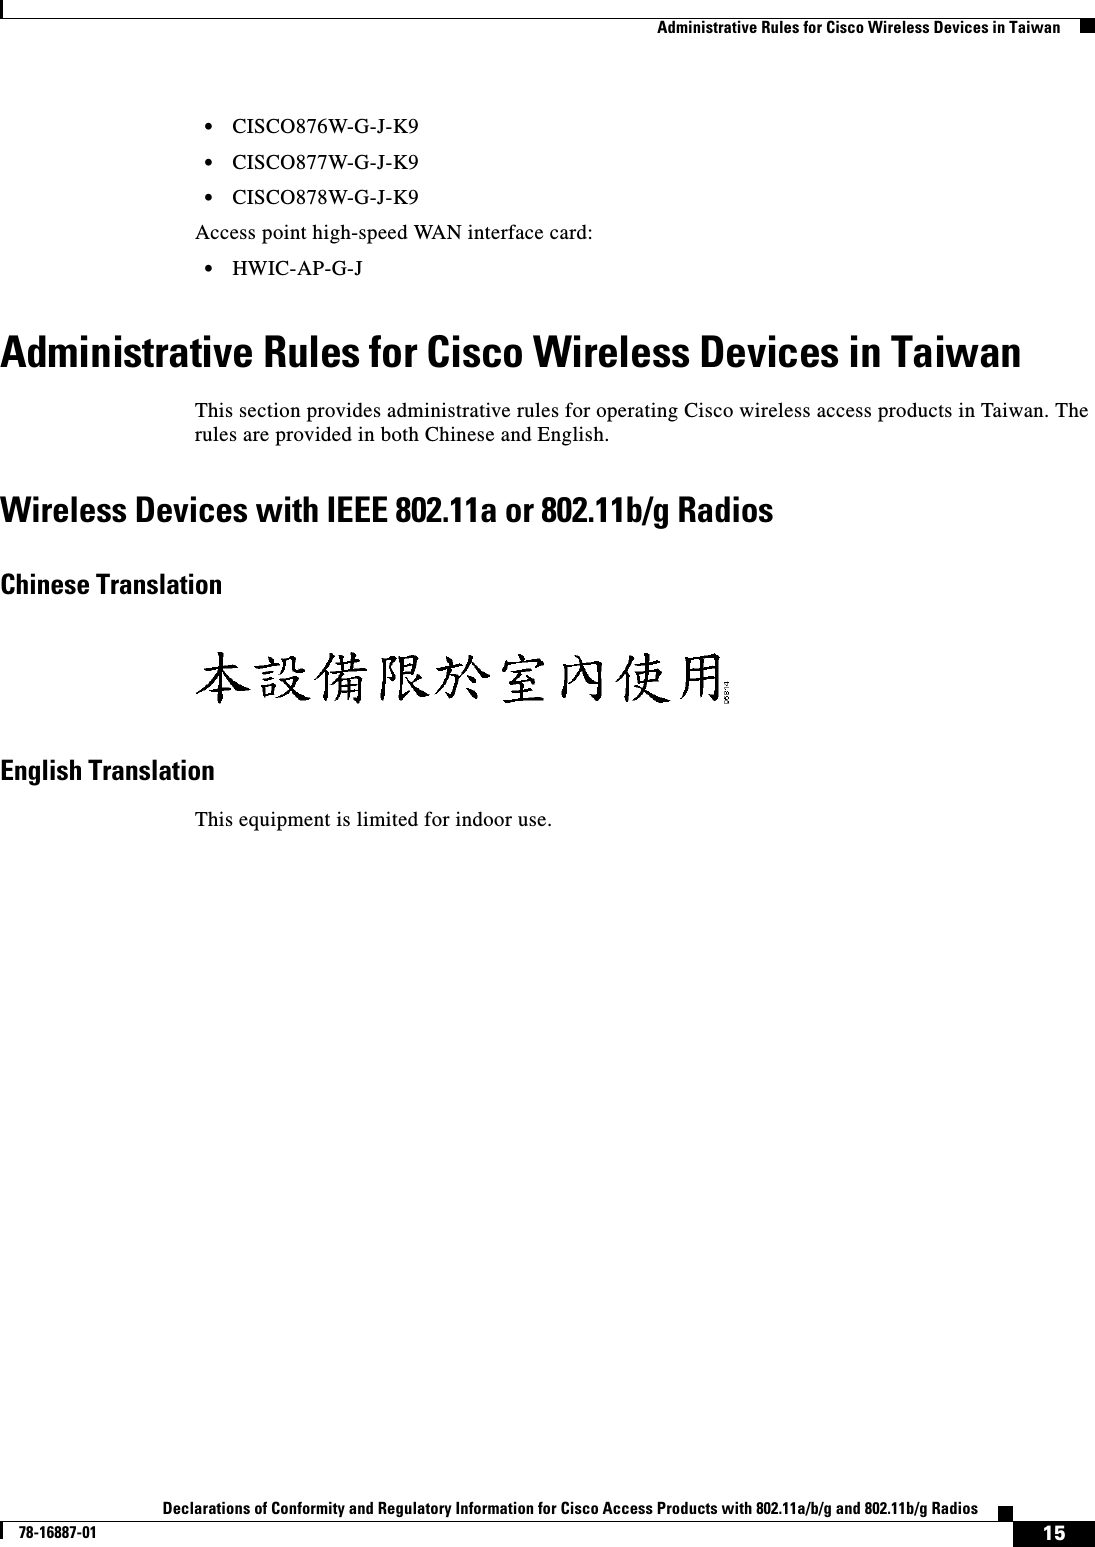  15Declarations of Conformity and Regulatory Information for Cisco Access Products with 802.11a/b/g and 802.11b/g Radios78-16887-01   Administrative Rules for Cisco Wireless Devices in Taiwan•CISCO876W-G-J-K9•CISCO877W-G-J-K9•CISCO878W-G-J-K9Access point high-speed WAN interface card:•HWIC-AP-G-JAdministrative Rules for Cisco Wireless Devices in TaiwanThis section provides administrative rules for operating Cisco wireless access products in Taiwan. The rules are provided in both Chinese and English.Wireless Devices with IEEE 802.11a or 802.11b/g Radios Chinese TranslationEnglish TranslationThis equipment is limited for indoor use.